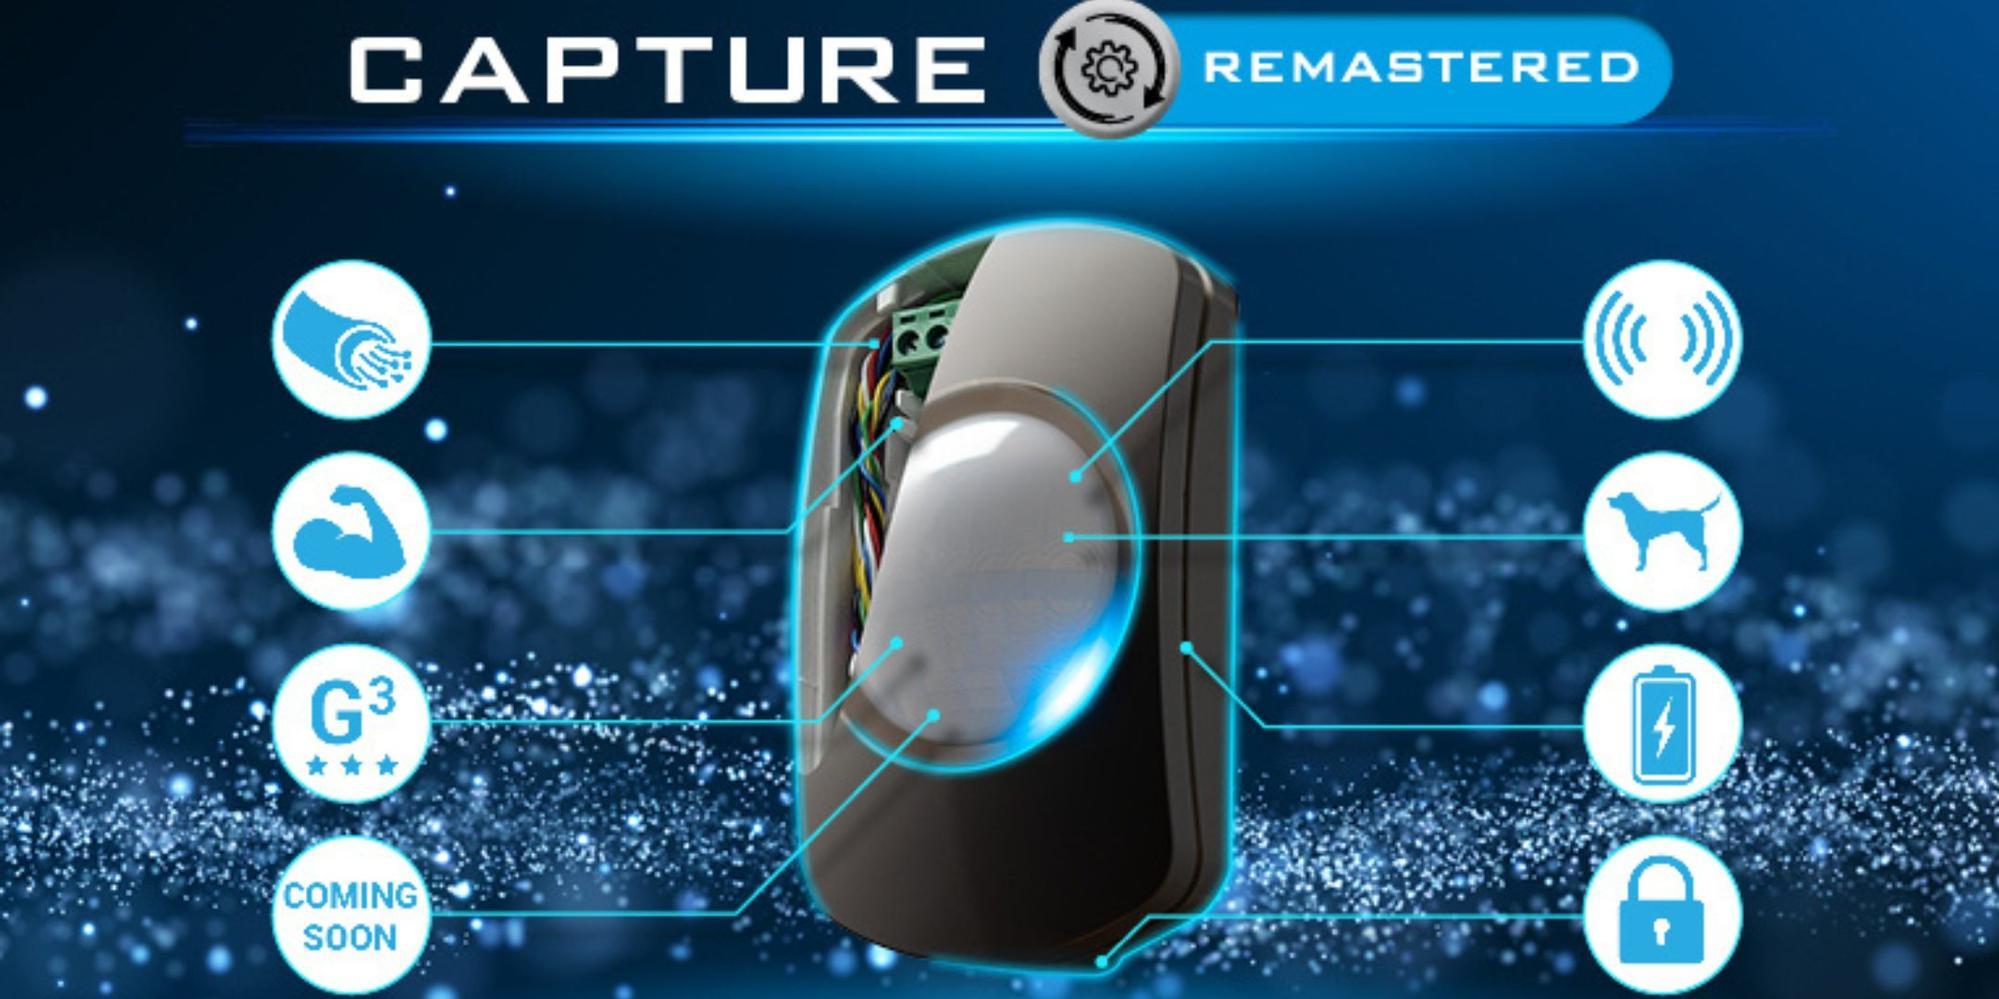 Texecom releases the Capture remastered 